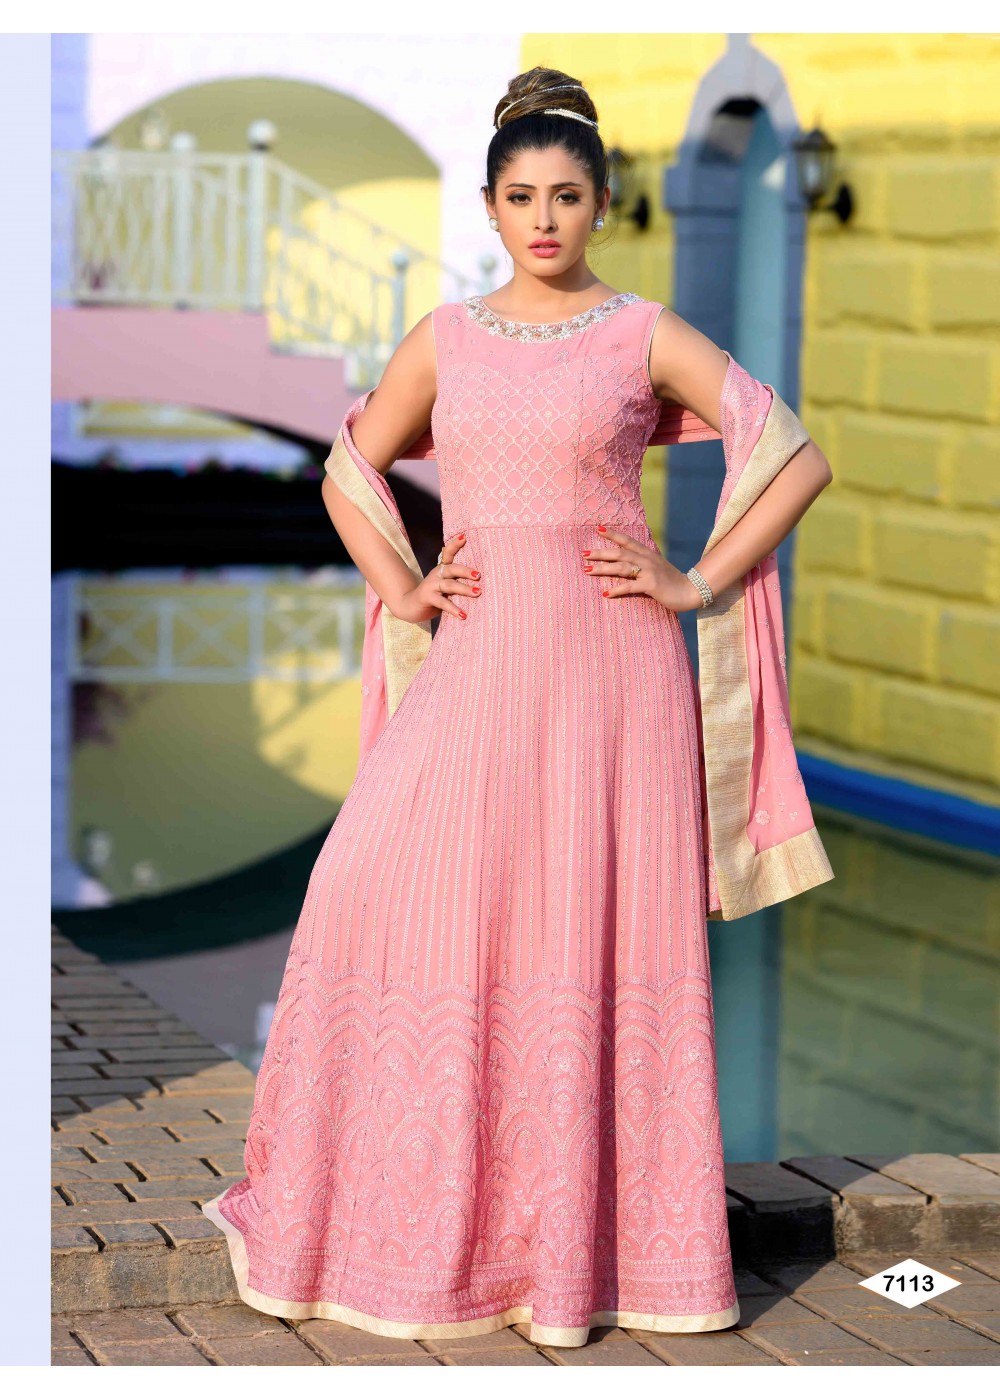 Buy Women's and Girls Party Gown| Long Kurti| Dresses| Stiched| Baby Pink  Color, Size - XL at Amazon.in